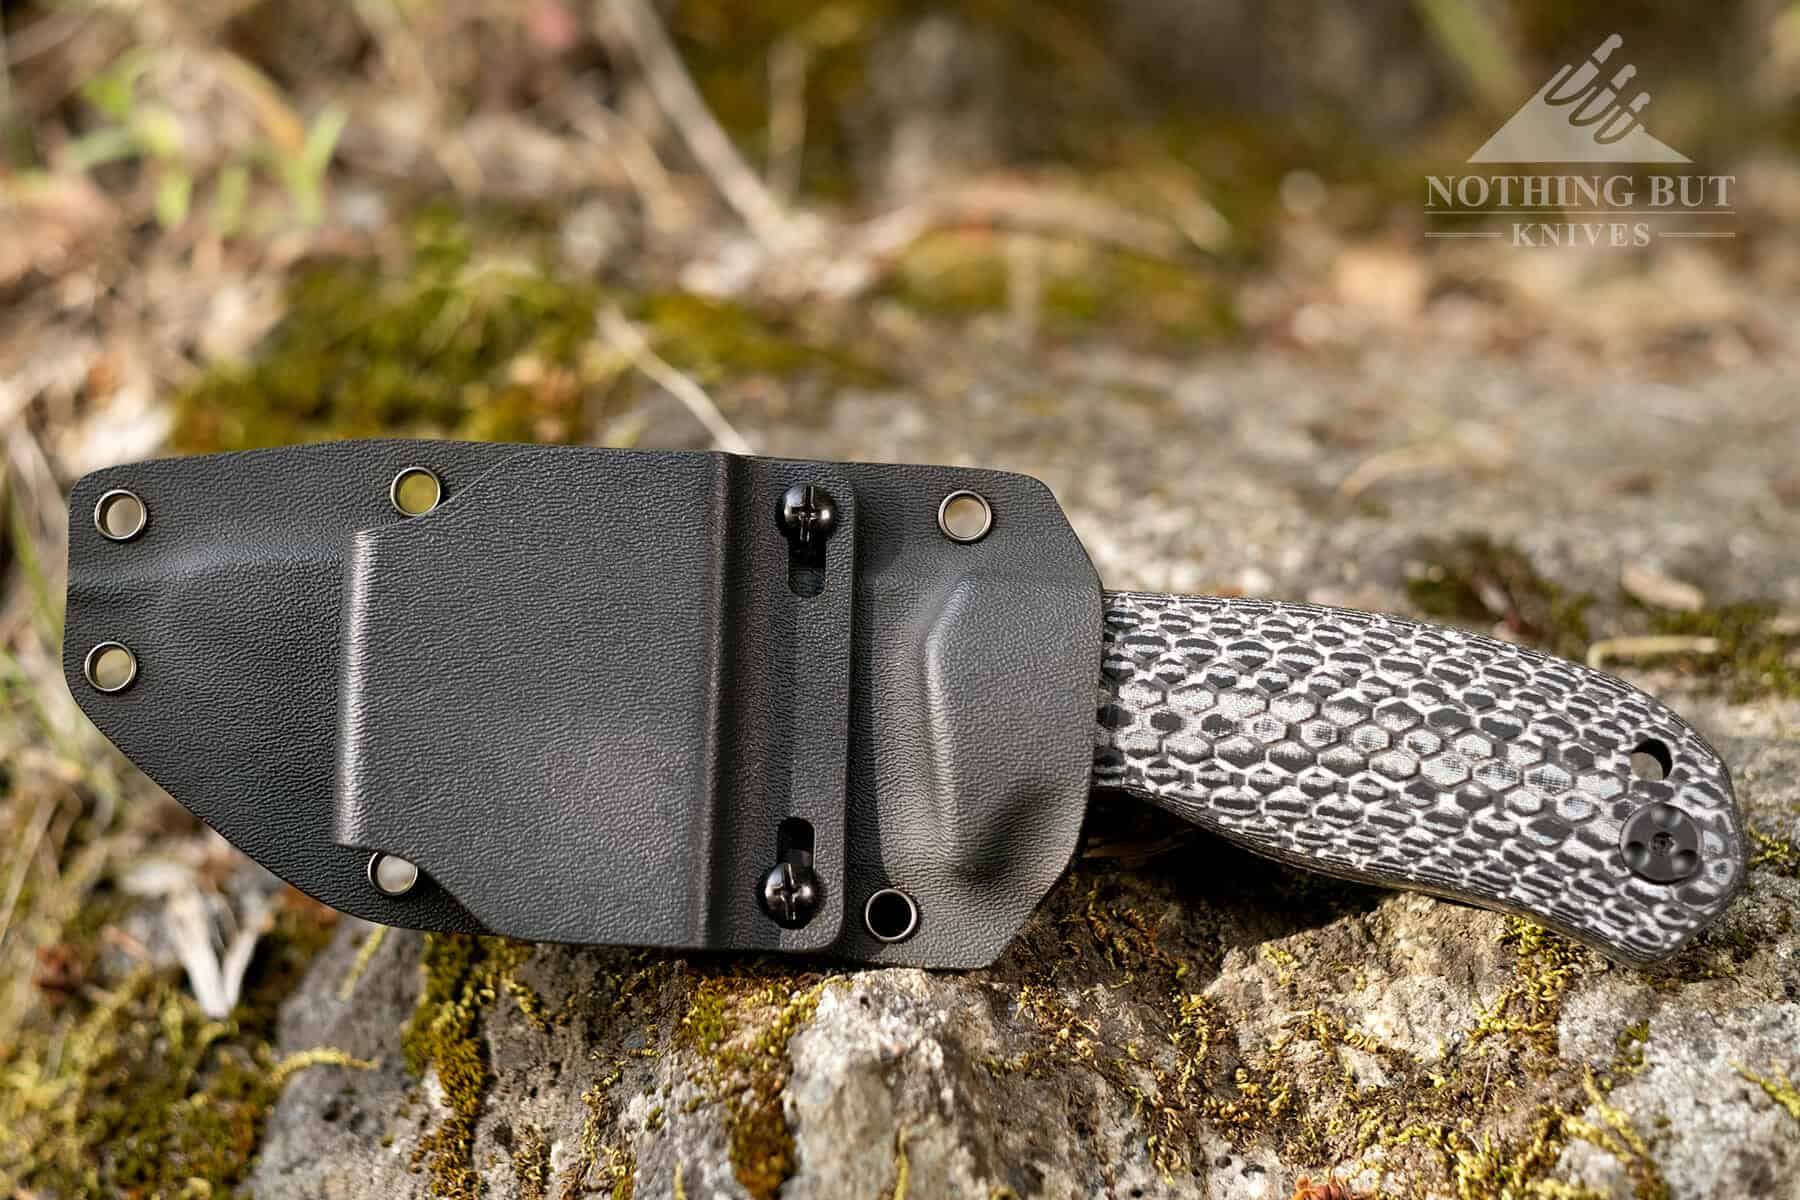 The sheath of the tracker x has a very secure and easy to use clip style